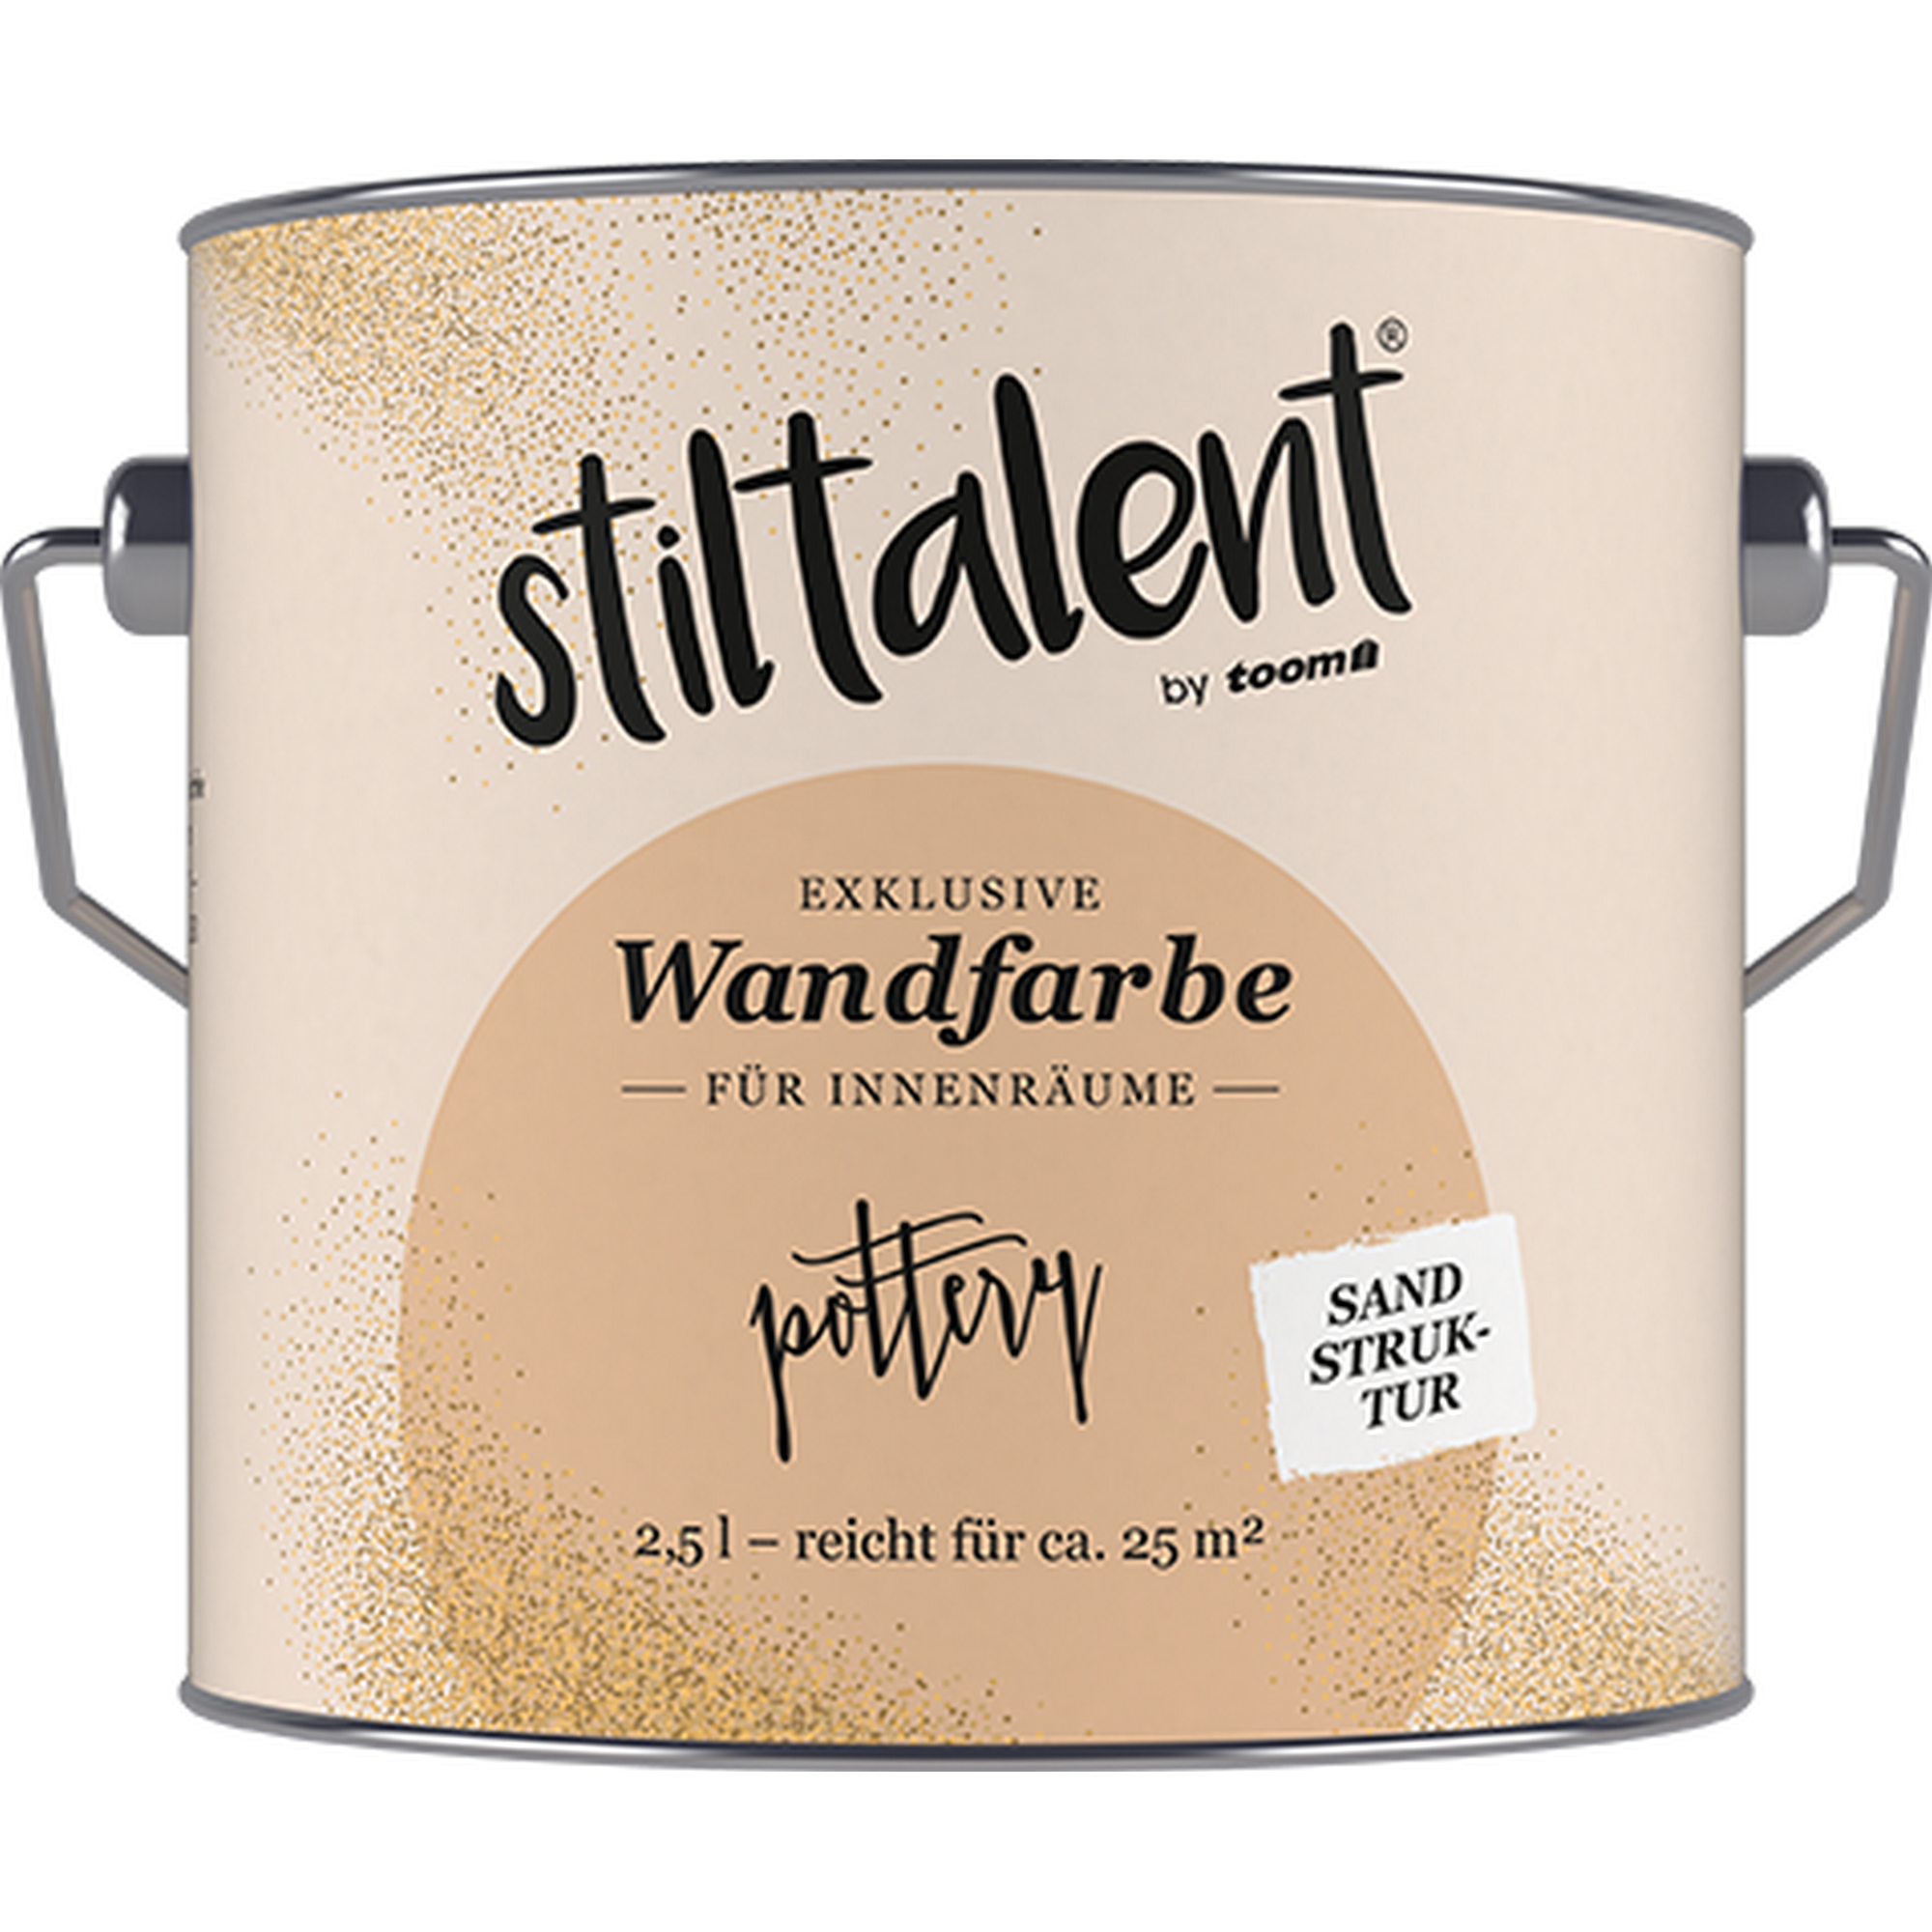 Wandfarbe 'Pottery' hellbraun Sandstruktur 2,5 l + product picture